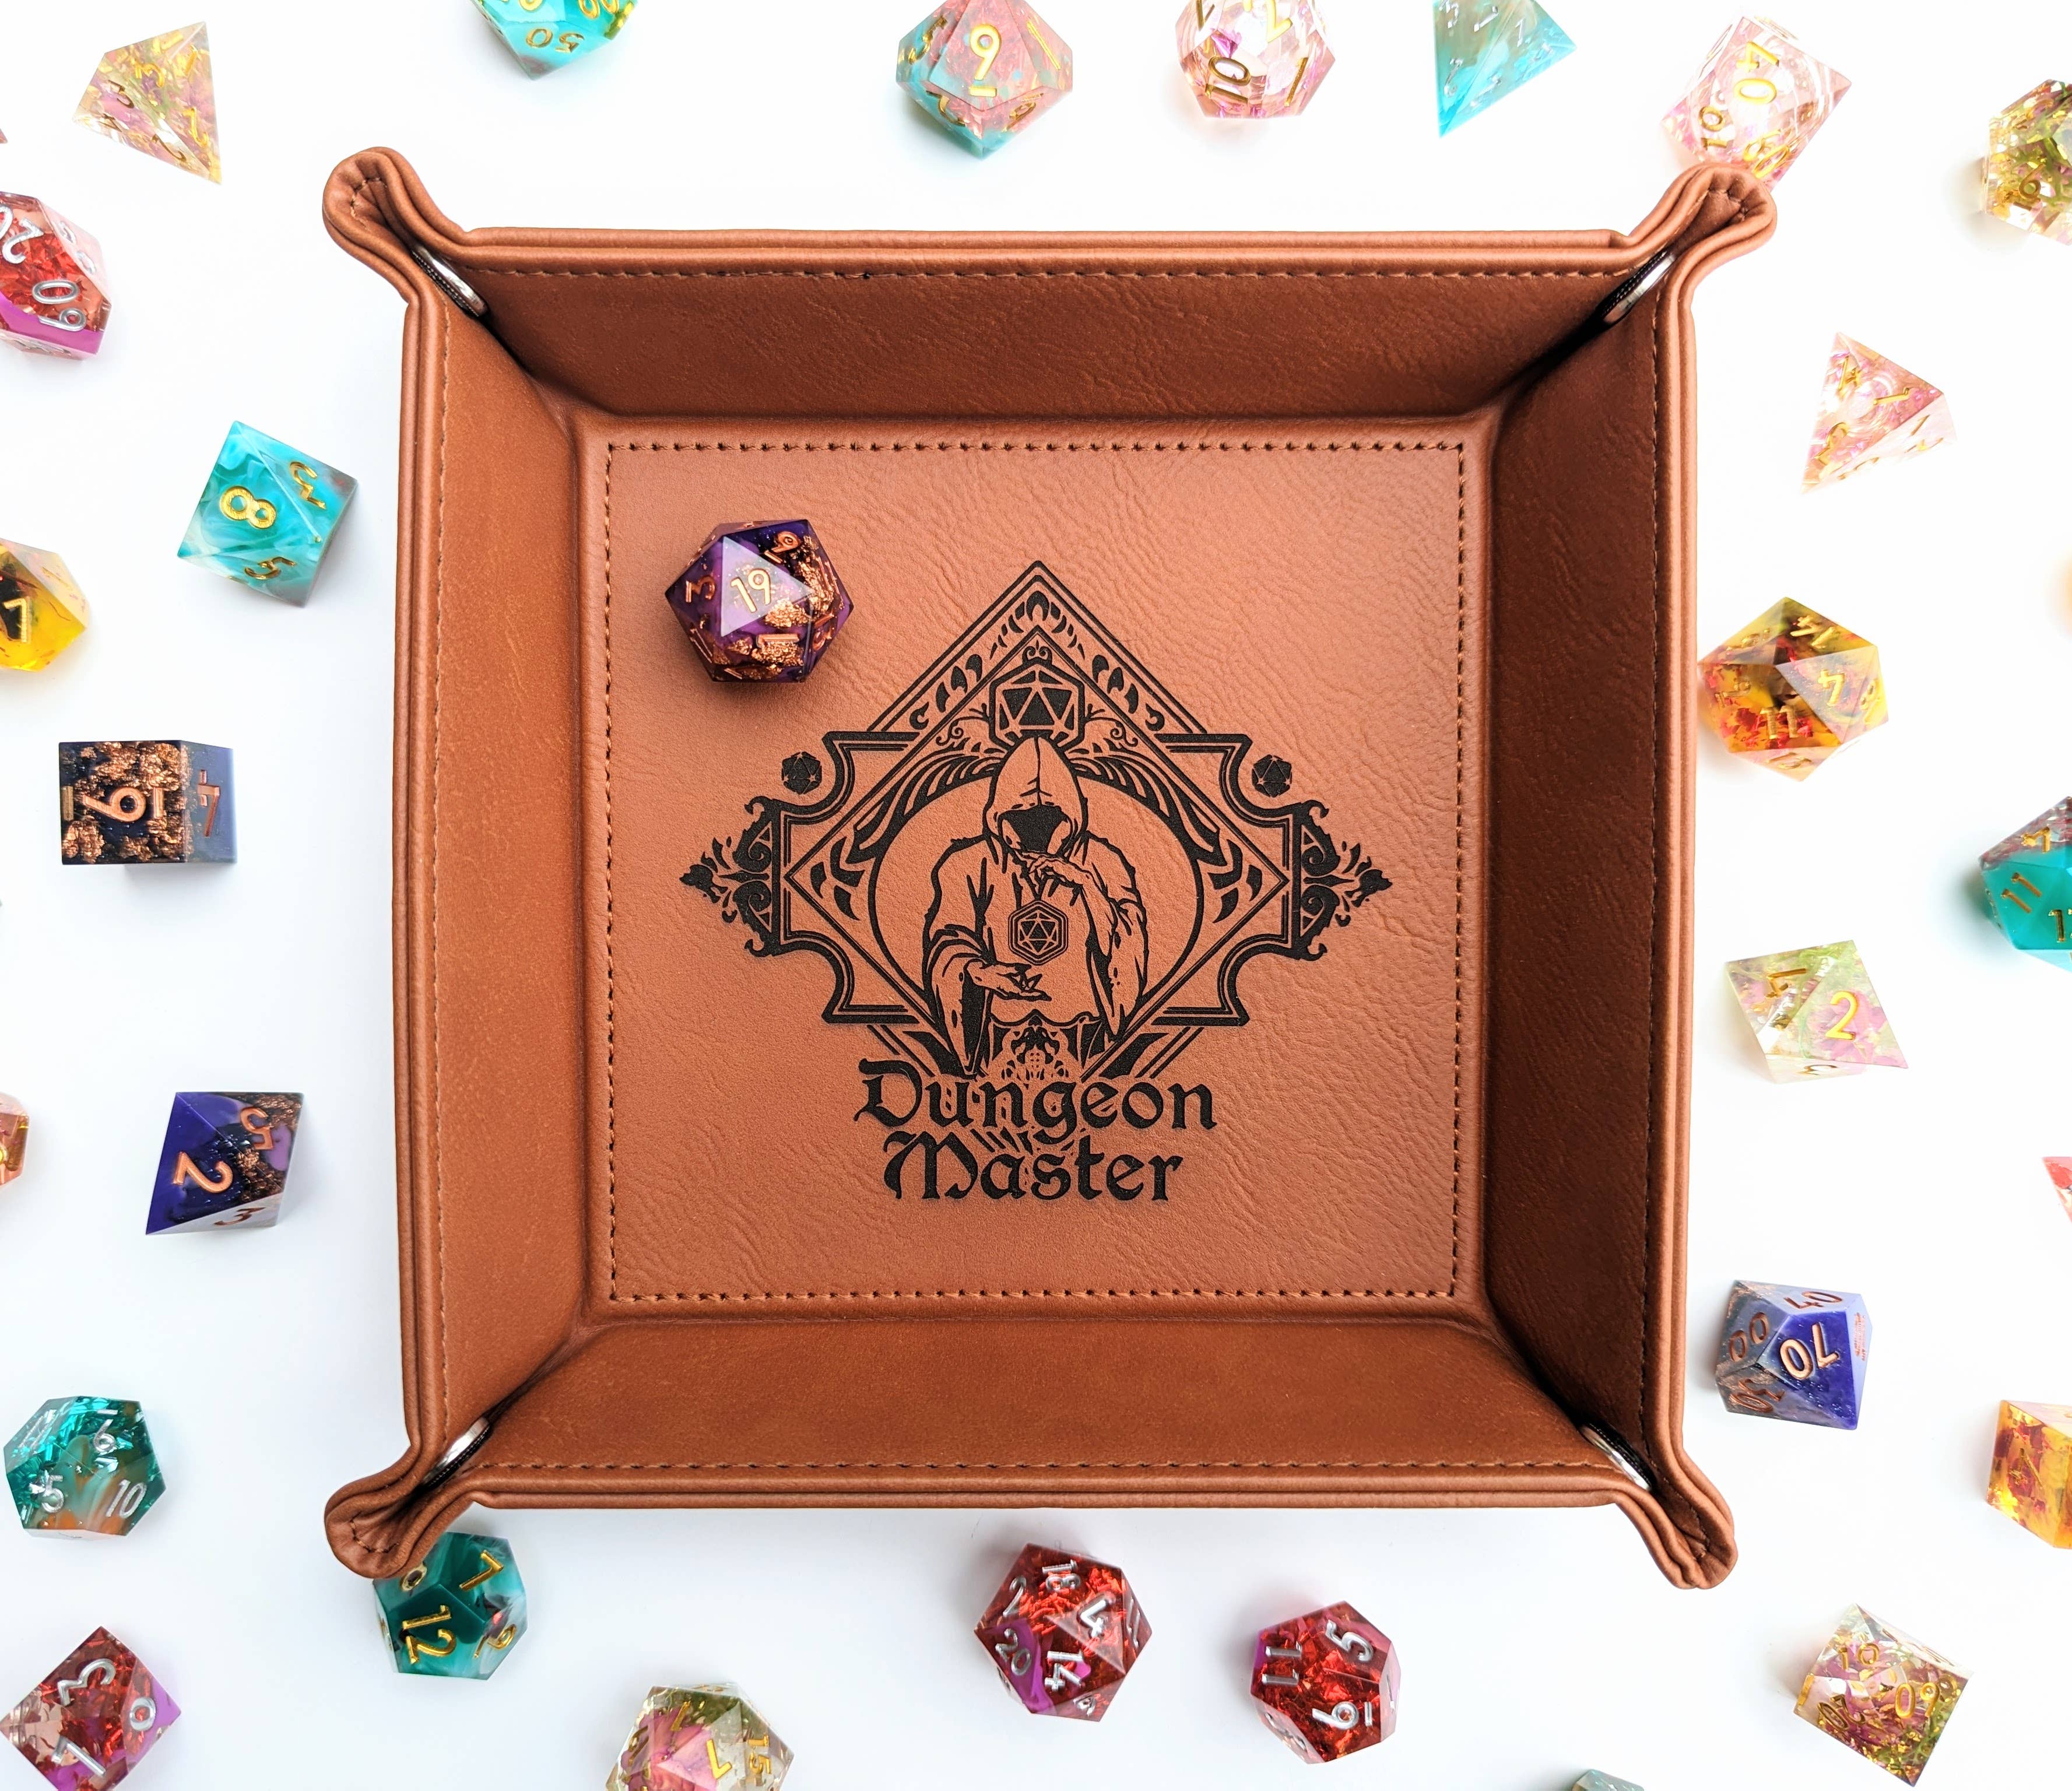 NTSD Gaming and Bookish Goods - The Fate Twister - D&D Vegan Leather Dice Rolling Tray - Bards & Cards